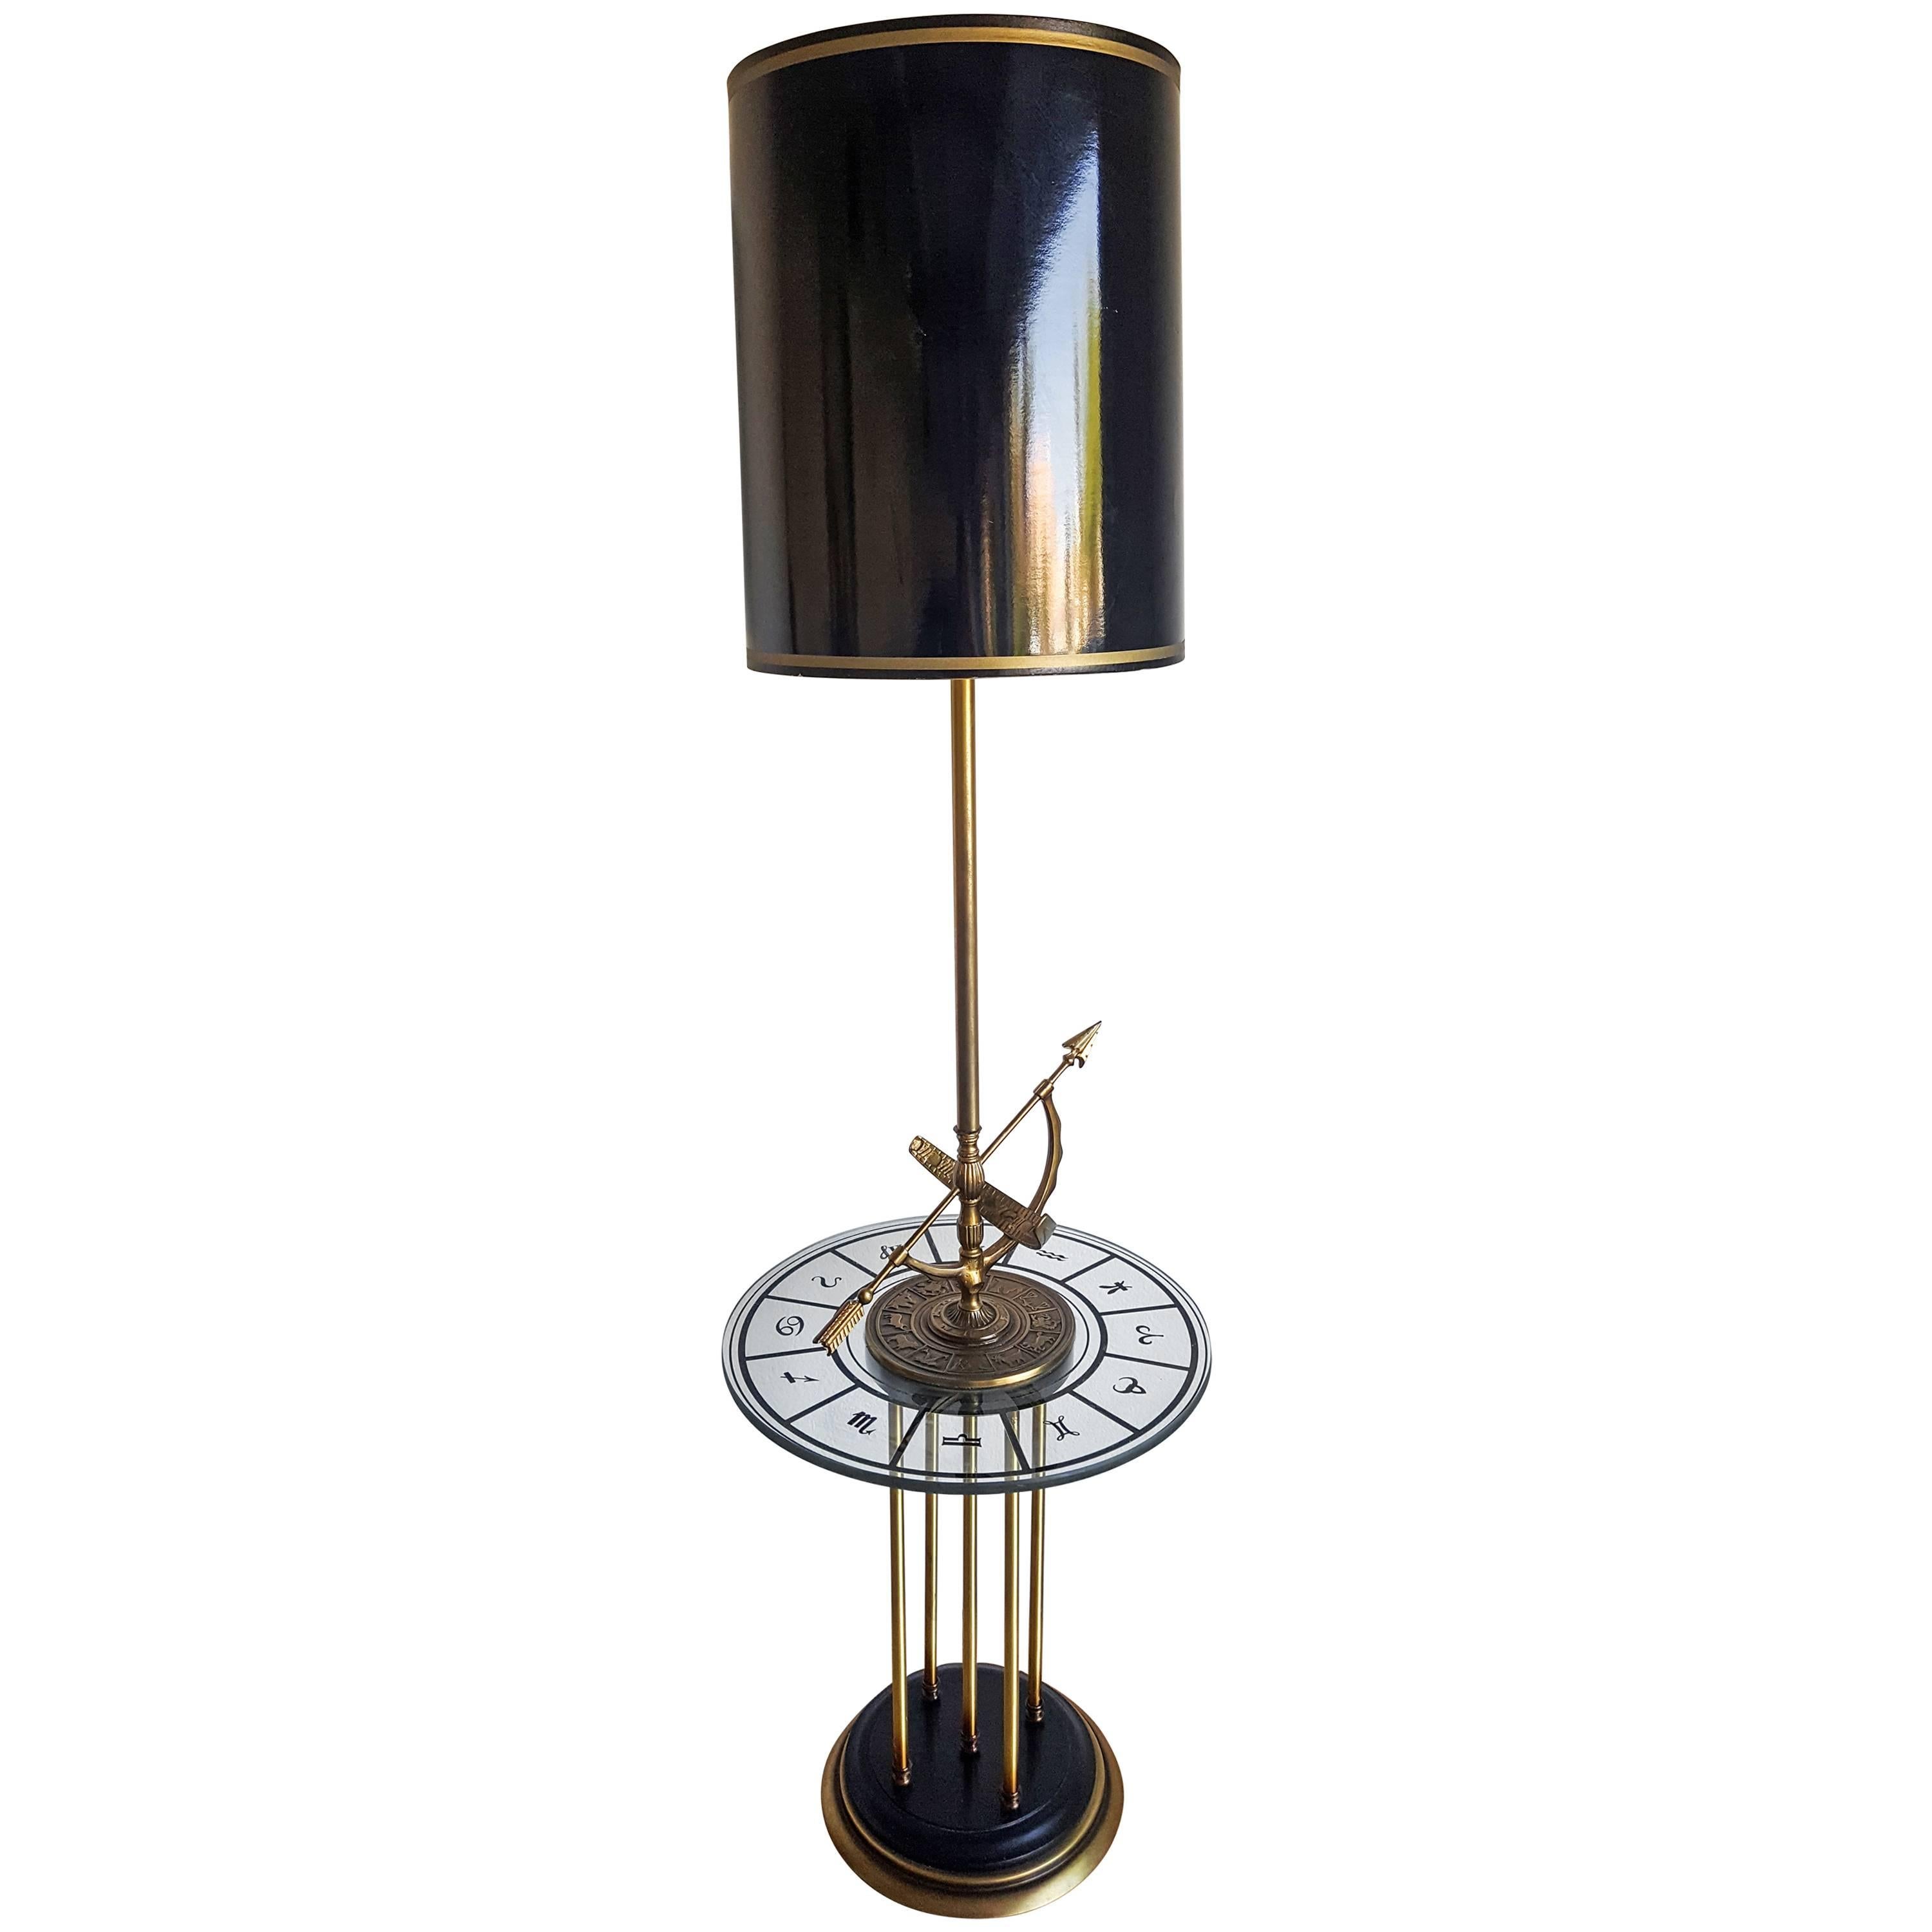 1960s Brass Armillary Astrological Floor Lamp with Gold Leaf